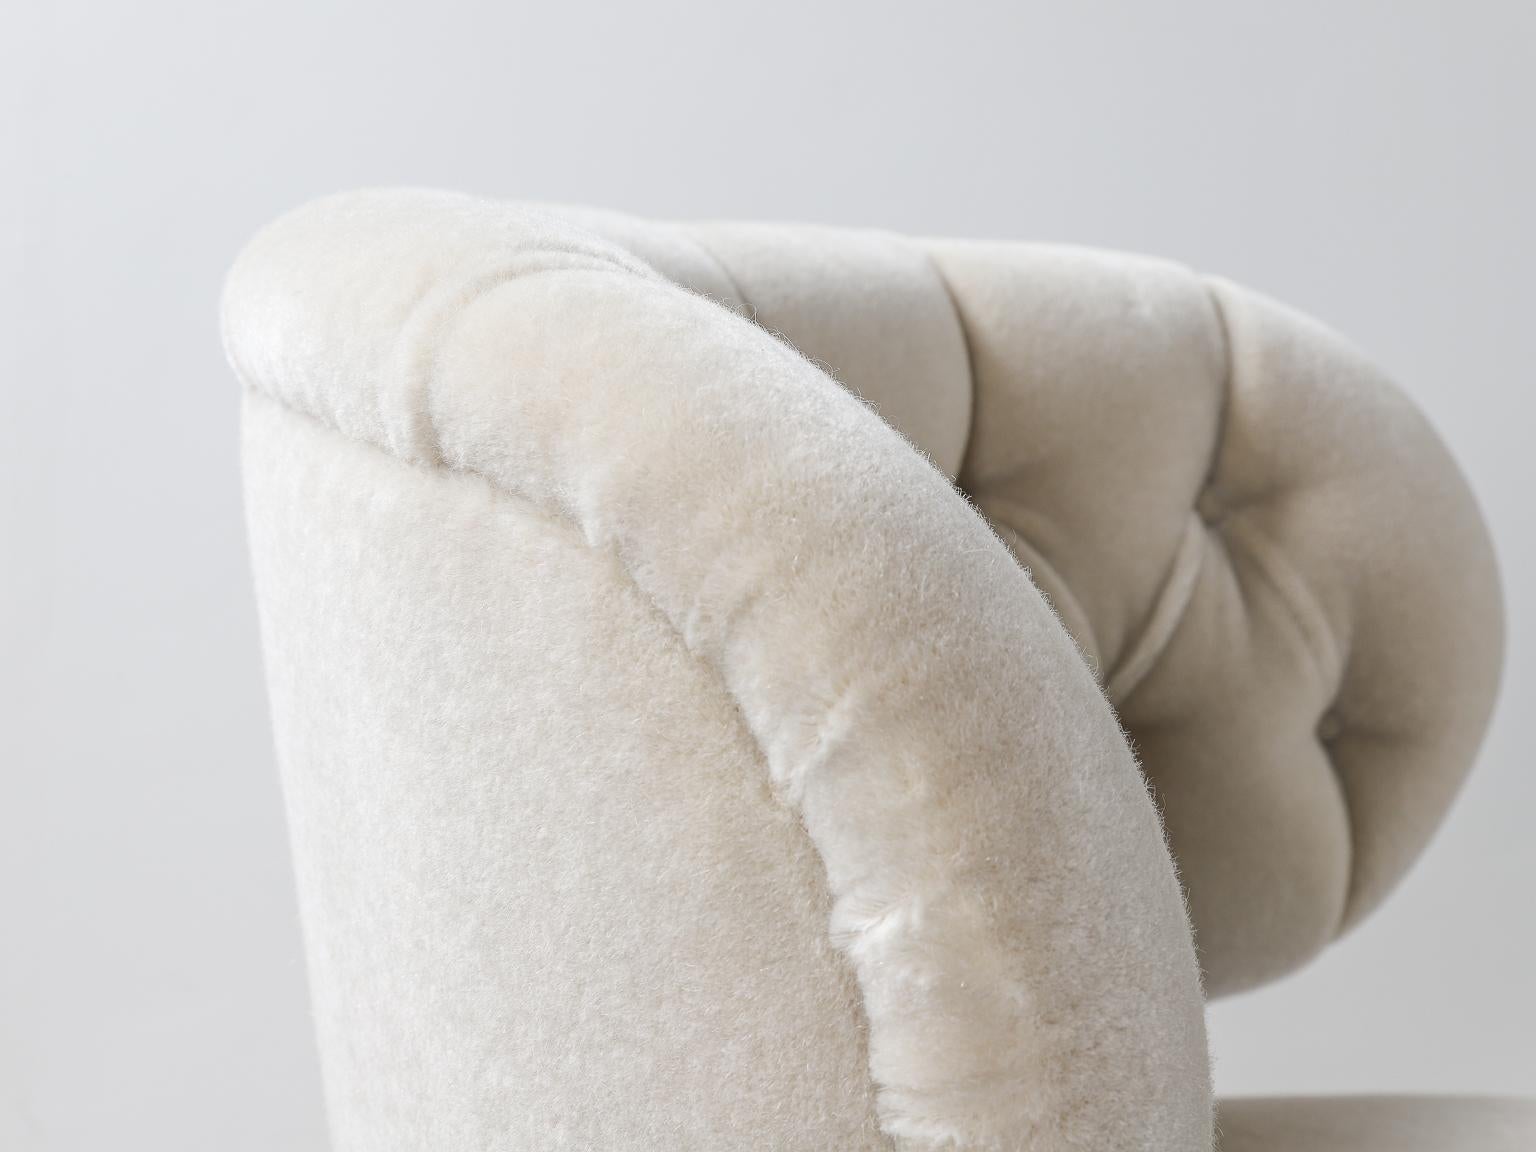 Mid-20th Century Armchair by Otto Schulz 1930s-1940s Upholstered in Bespoke Mohair